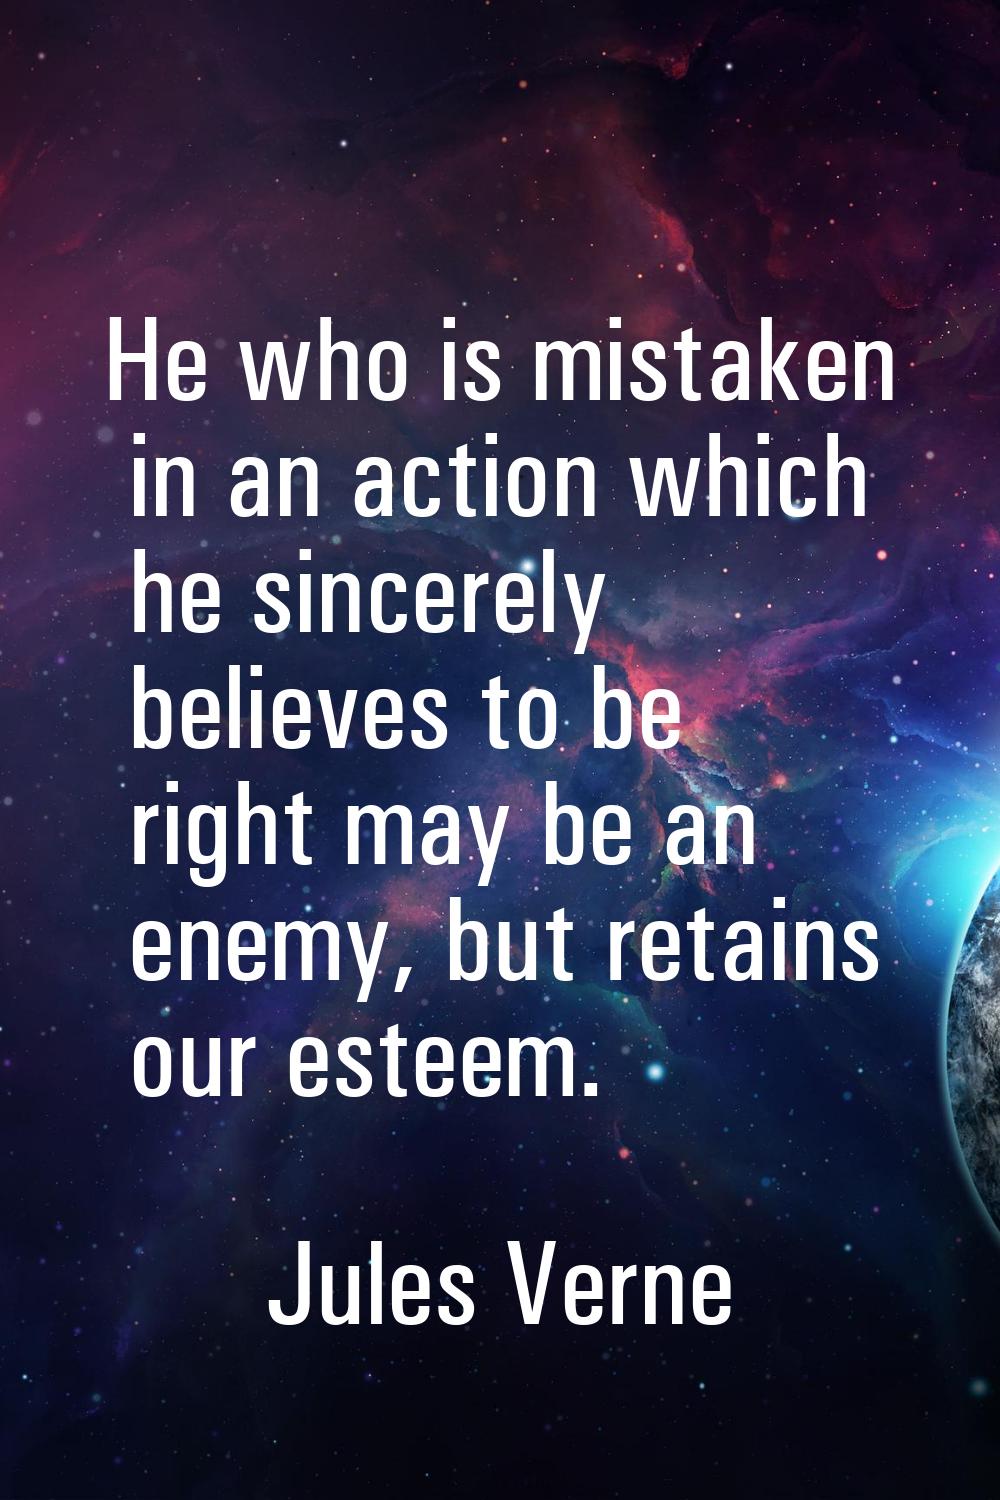 He who is mistaken in an action which he sincerely believes to be right may be an enemy, but retain